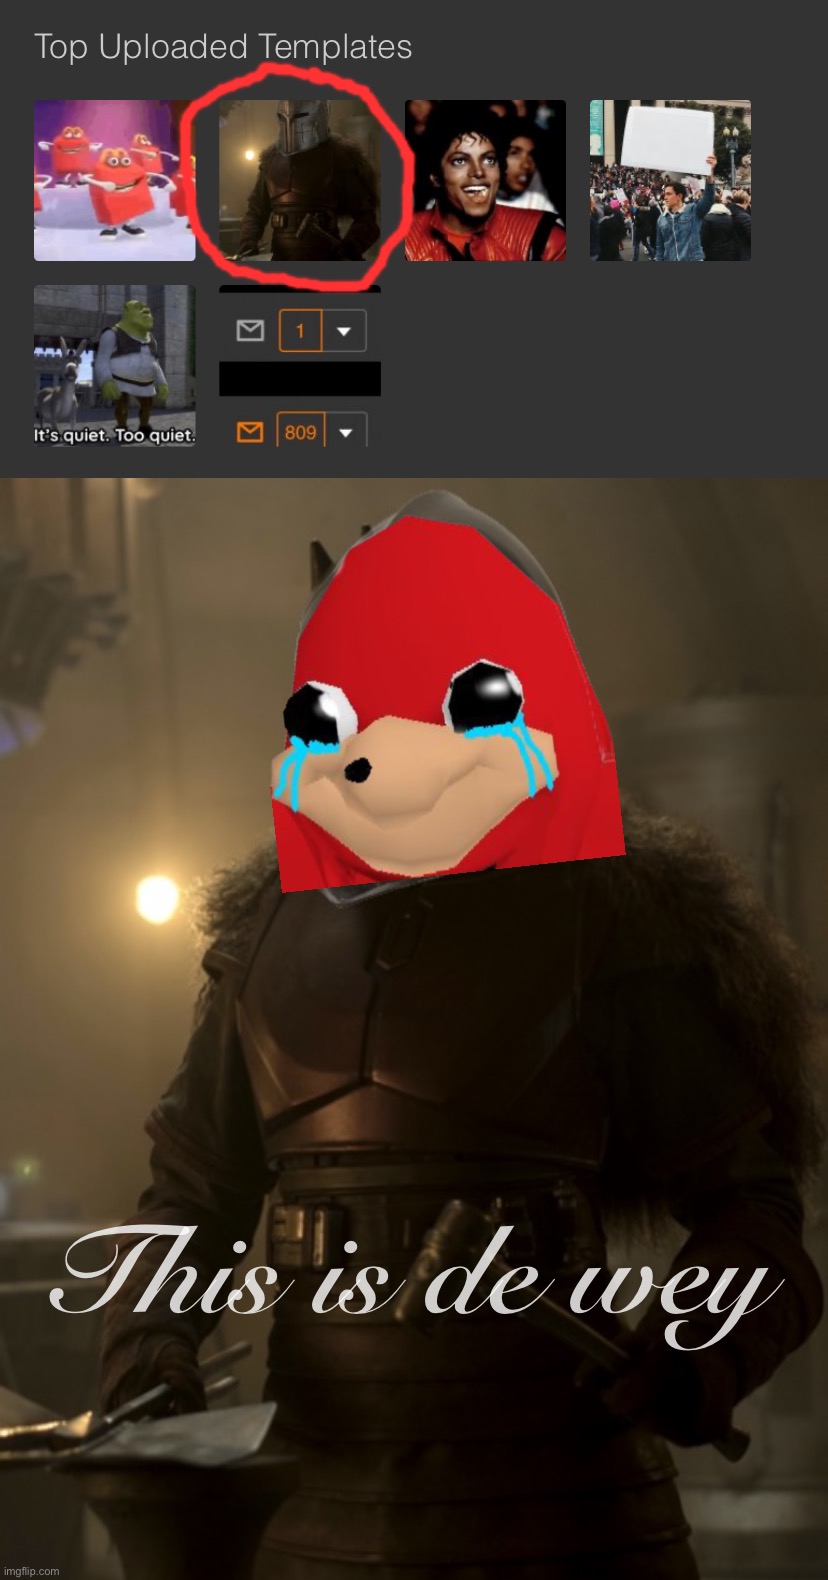 [Humbled, honored] | This is de wey | image tagged in crusader mandalorian blacksmith,crusader,this,is,de,wey | made w/ Imgflip meme maker